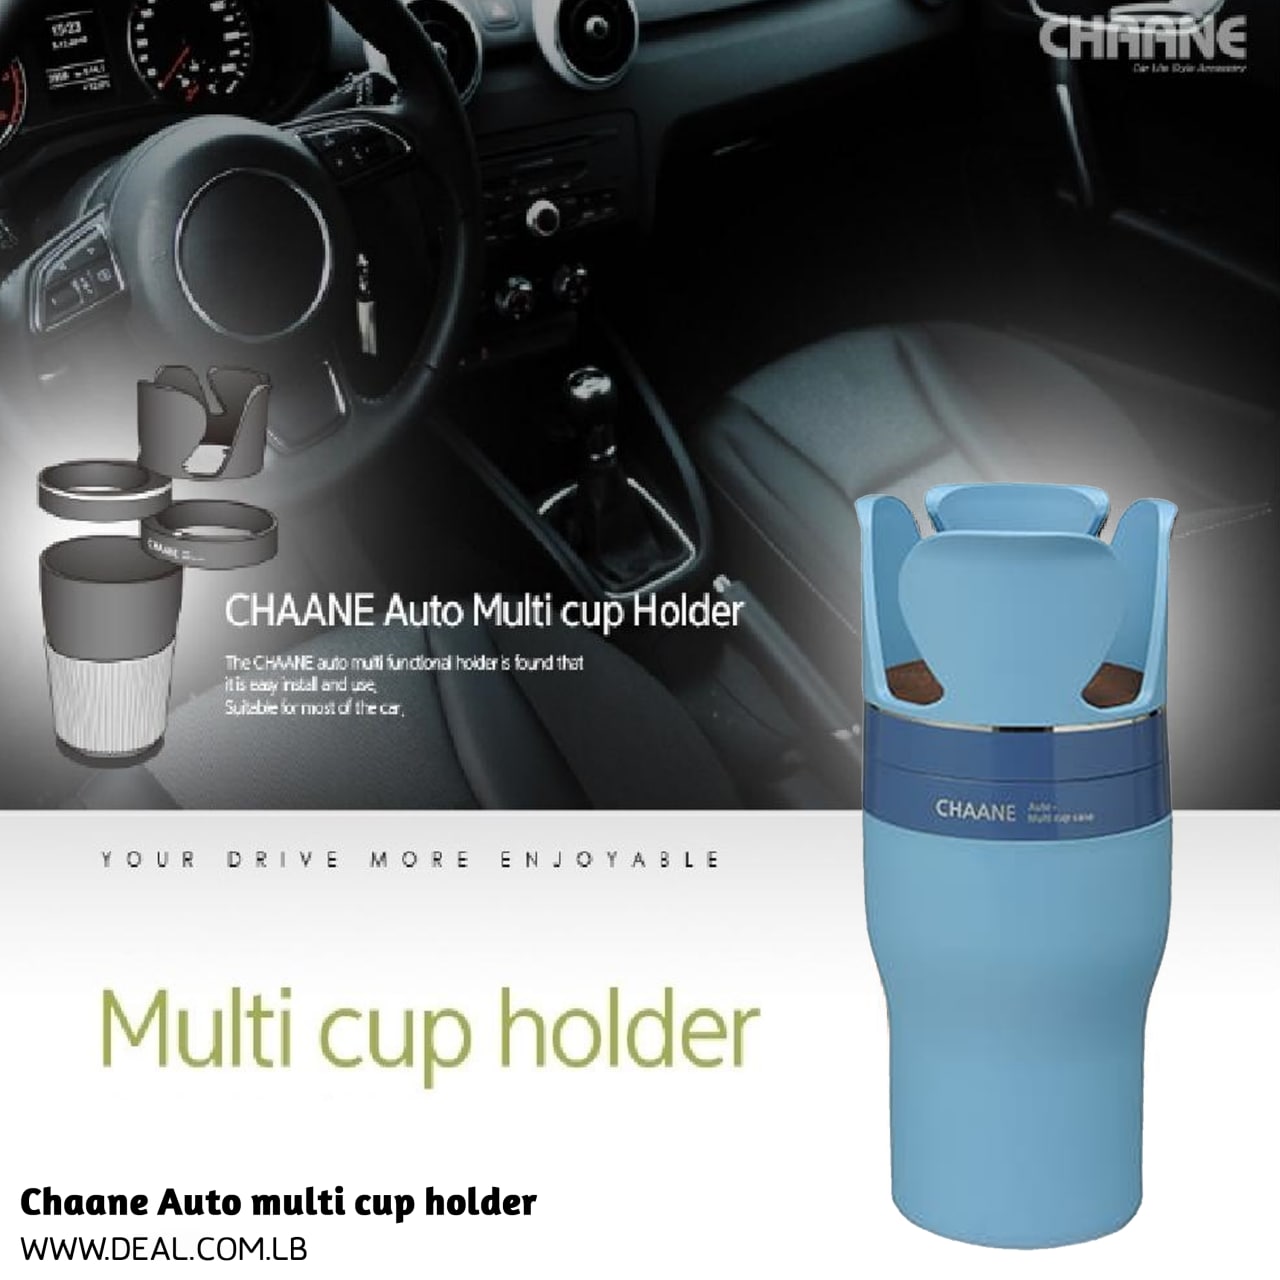 Chaane Auto Multi Cup Holder